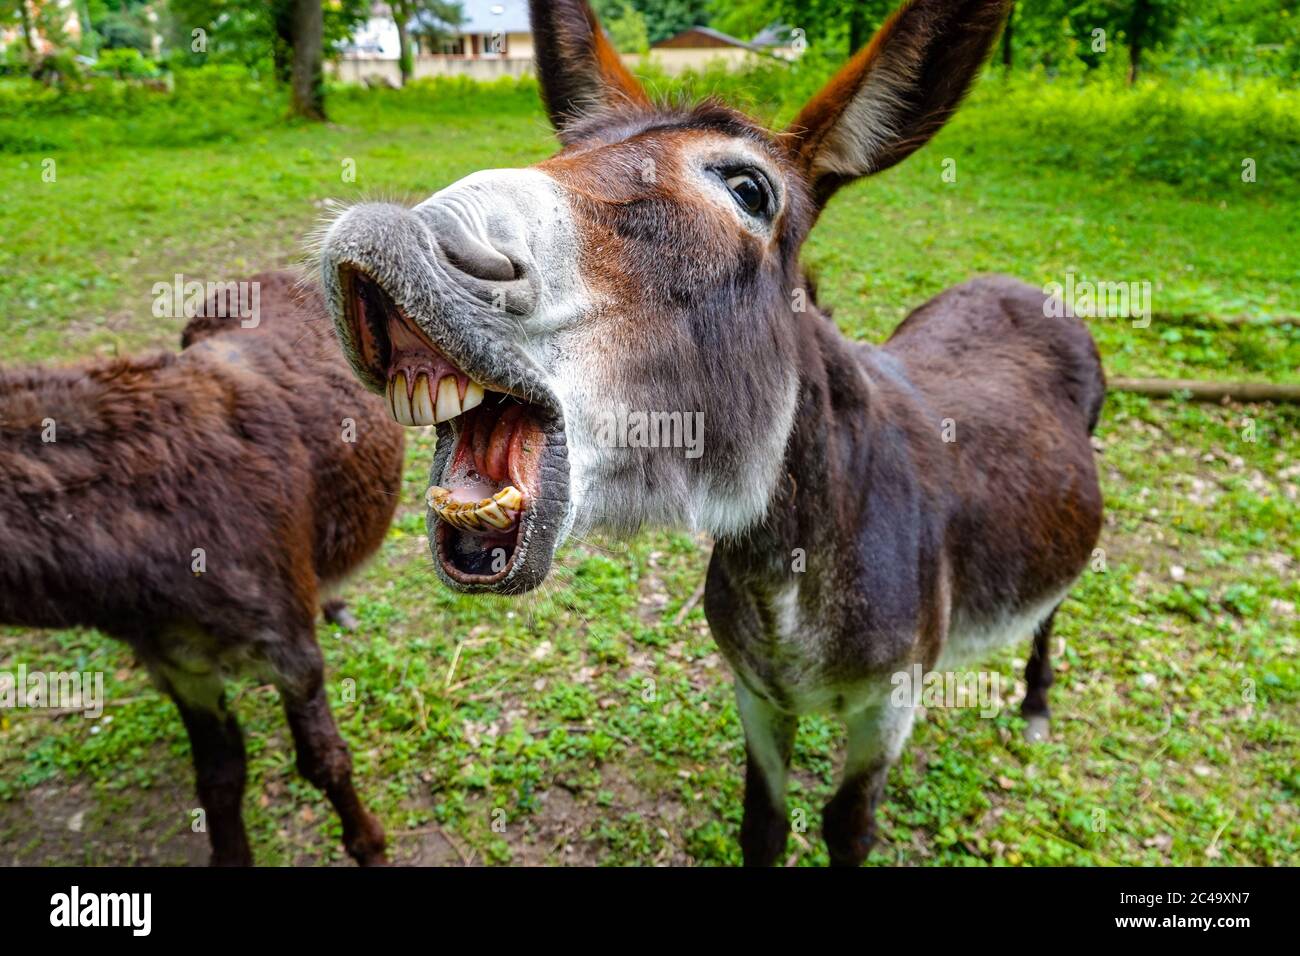 Close-up of head of donkey with mouth open showing its teeth Stock Photo